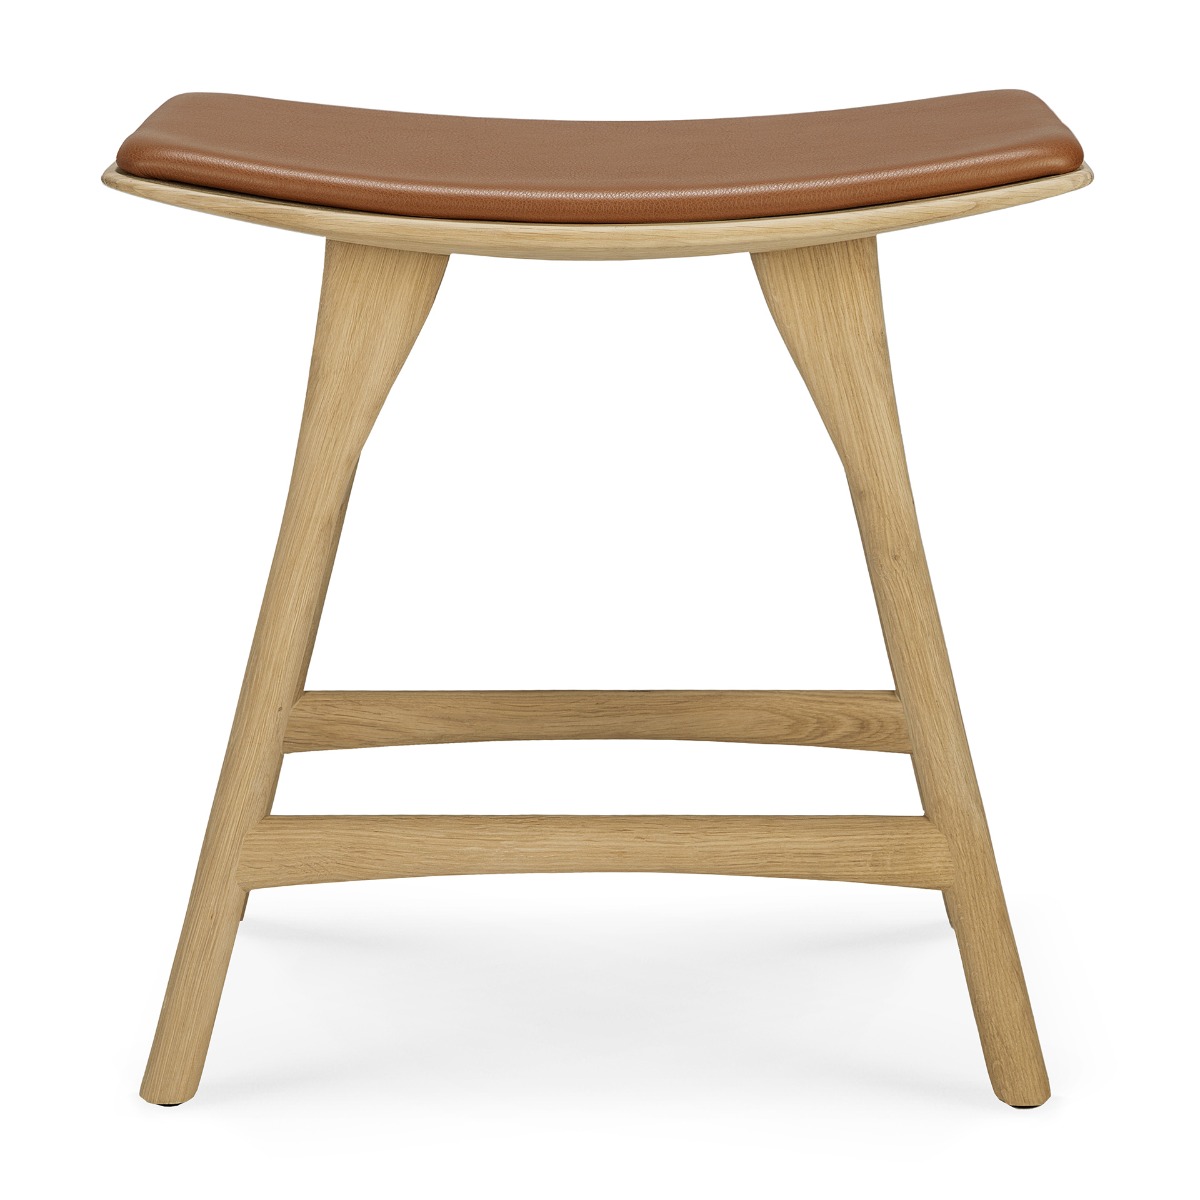 Osso dining stool - cognac leather